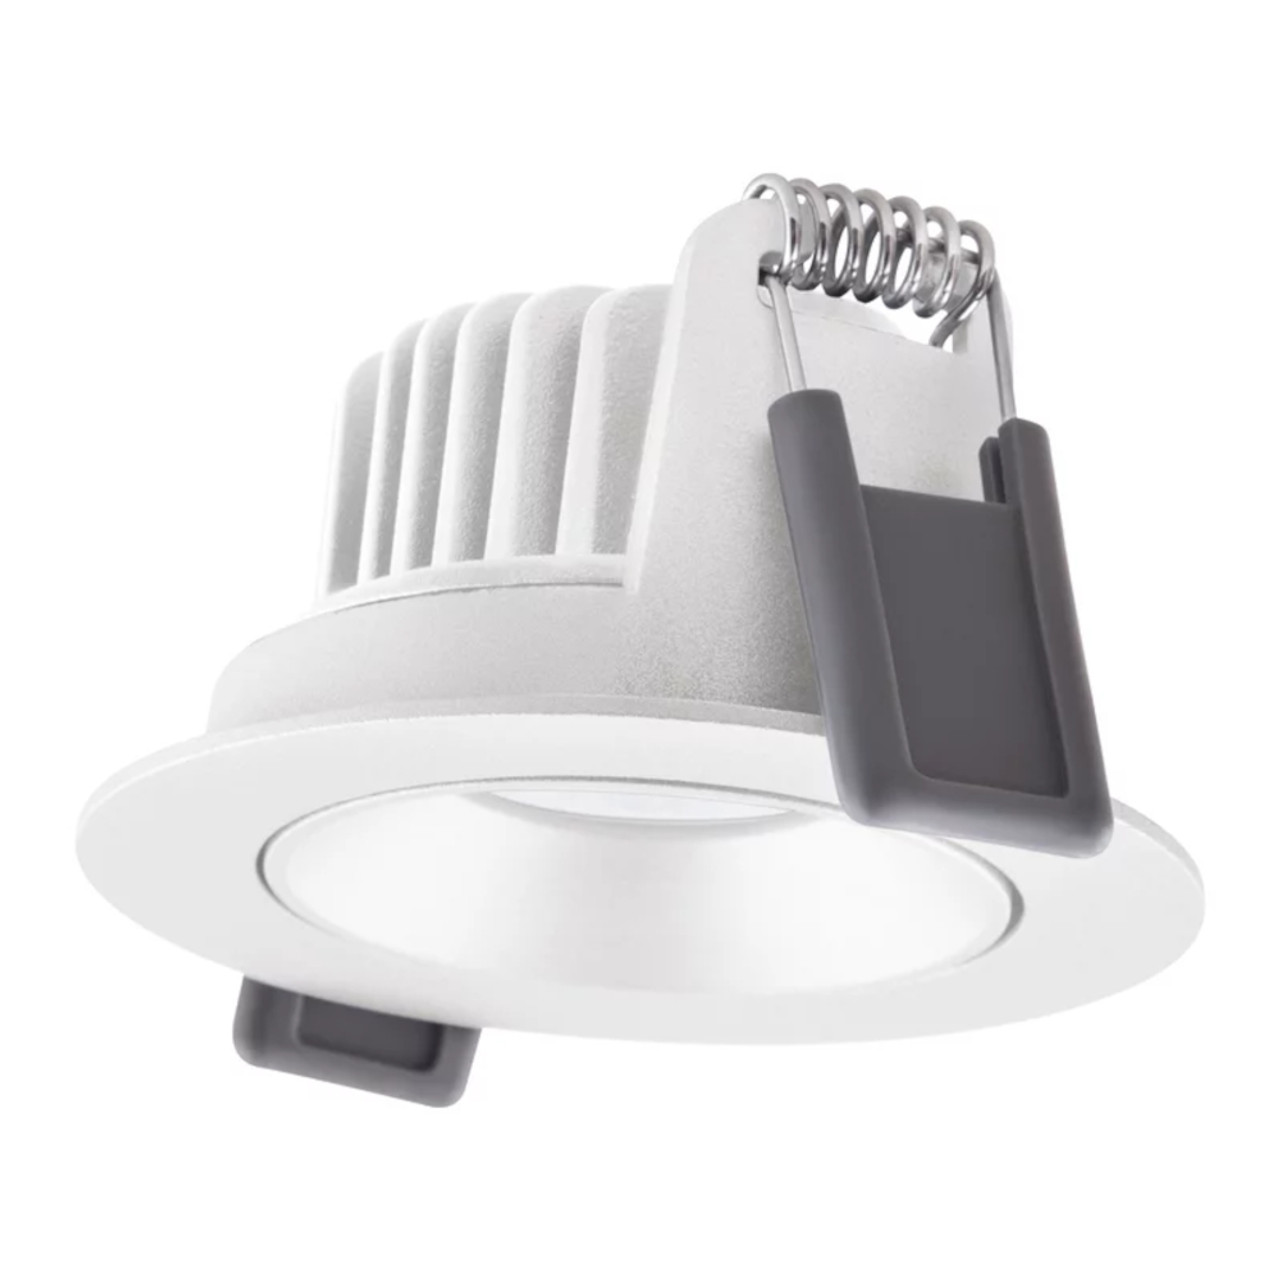 LED Tilting Spotlight 8W 3000K CRi90 36 Degrees 68mm Cut Out Dimmable White